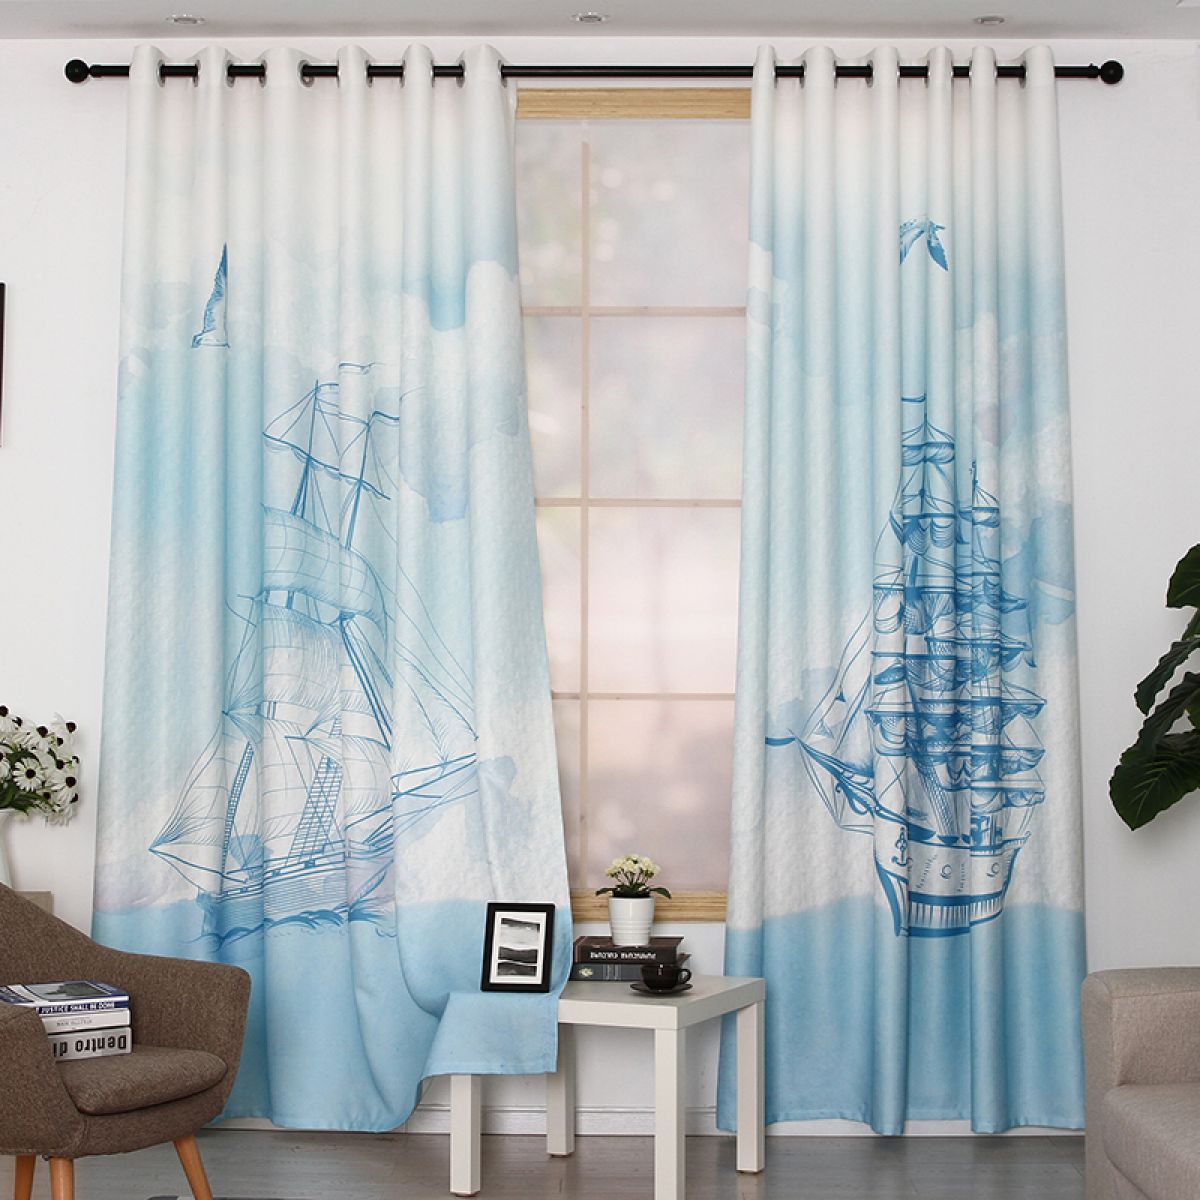 3d Sailing Boat Printed Window Curtain Home Decor